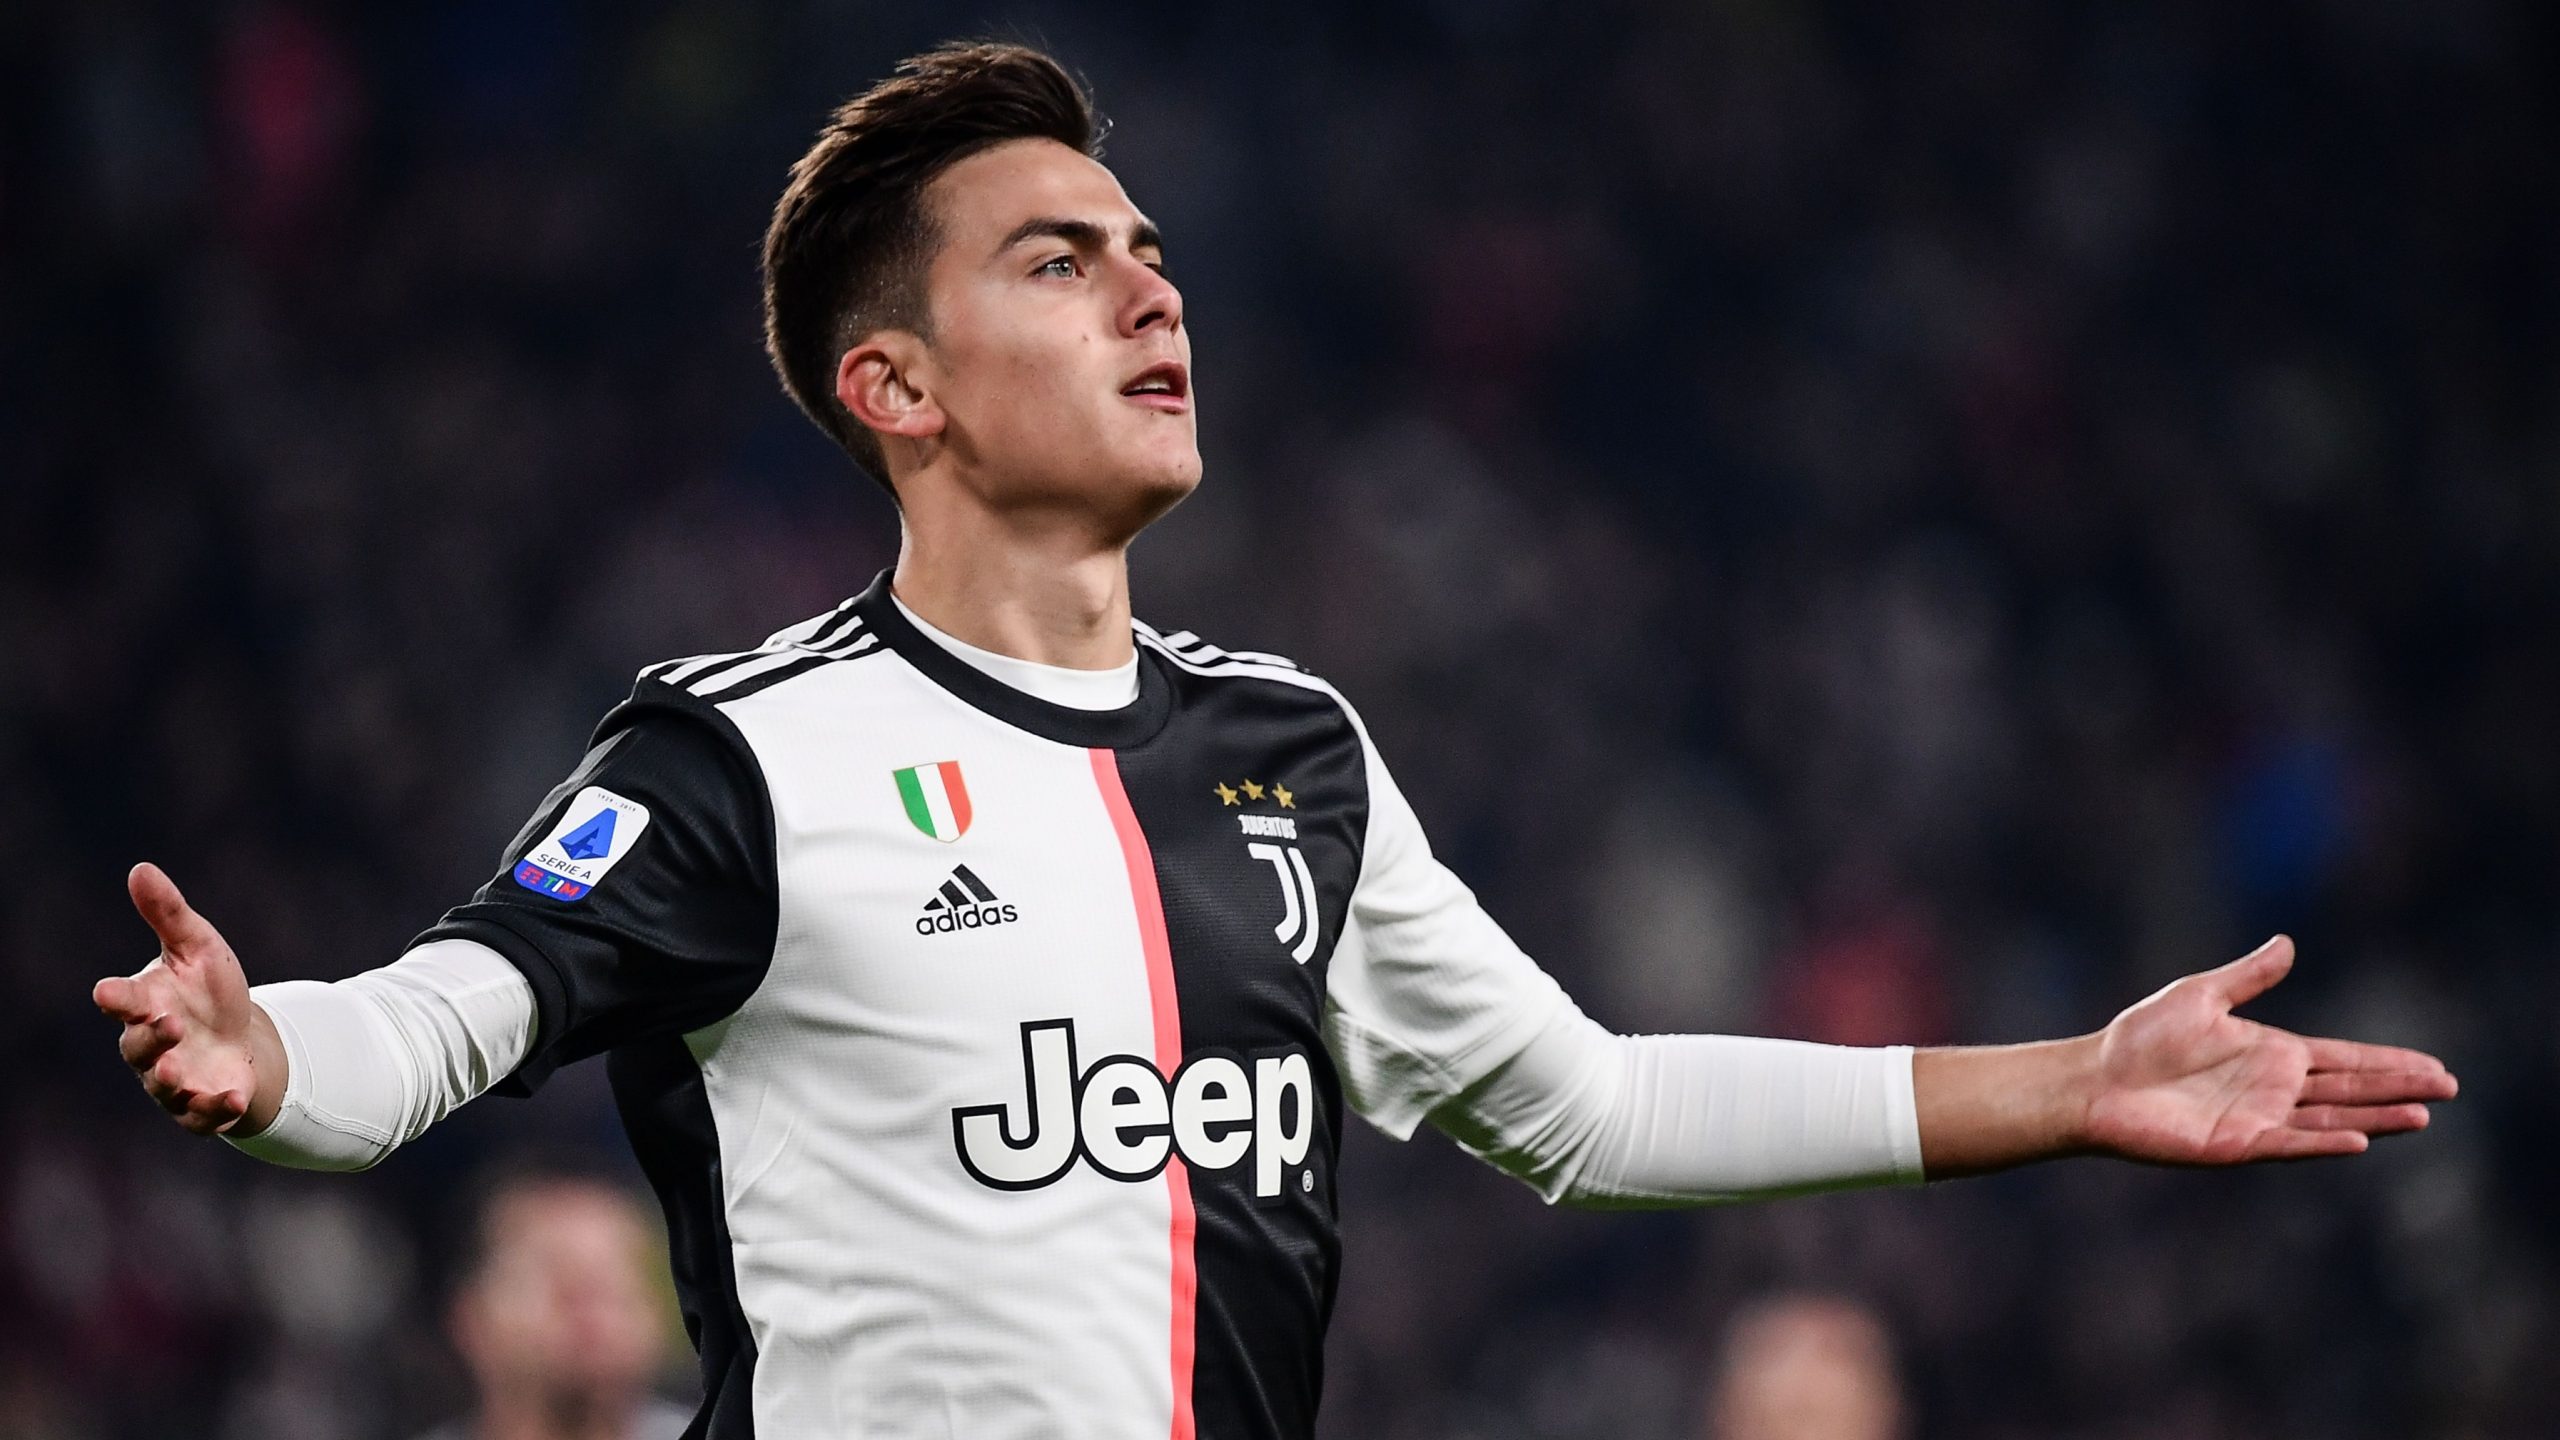 Chelsea could join the race to sign Juventus attacker Paulo Dybala once the club's takeover is completed.